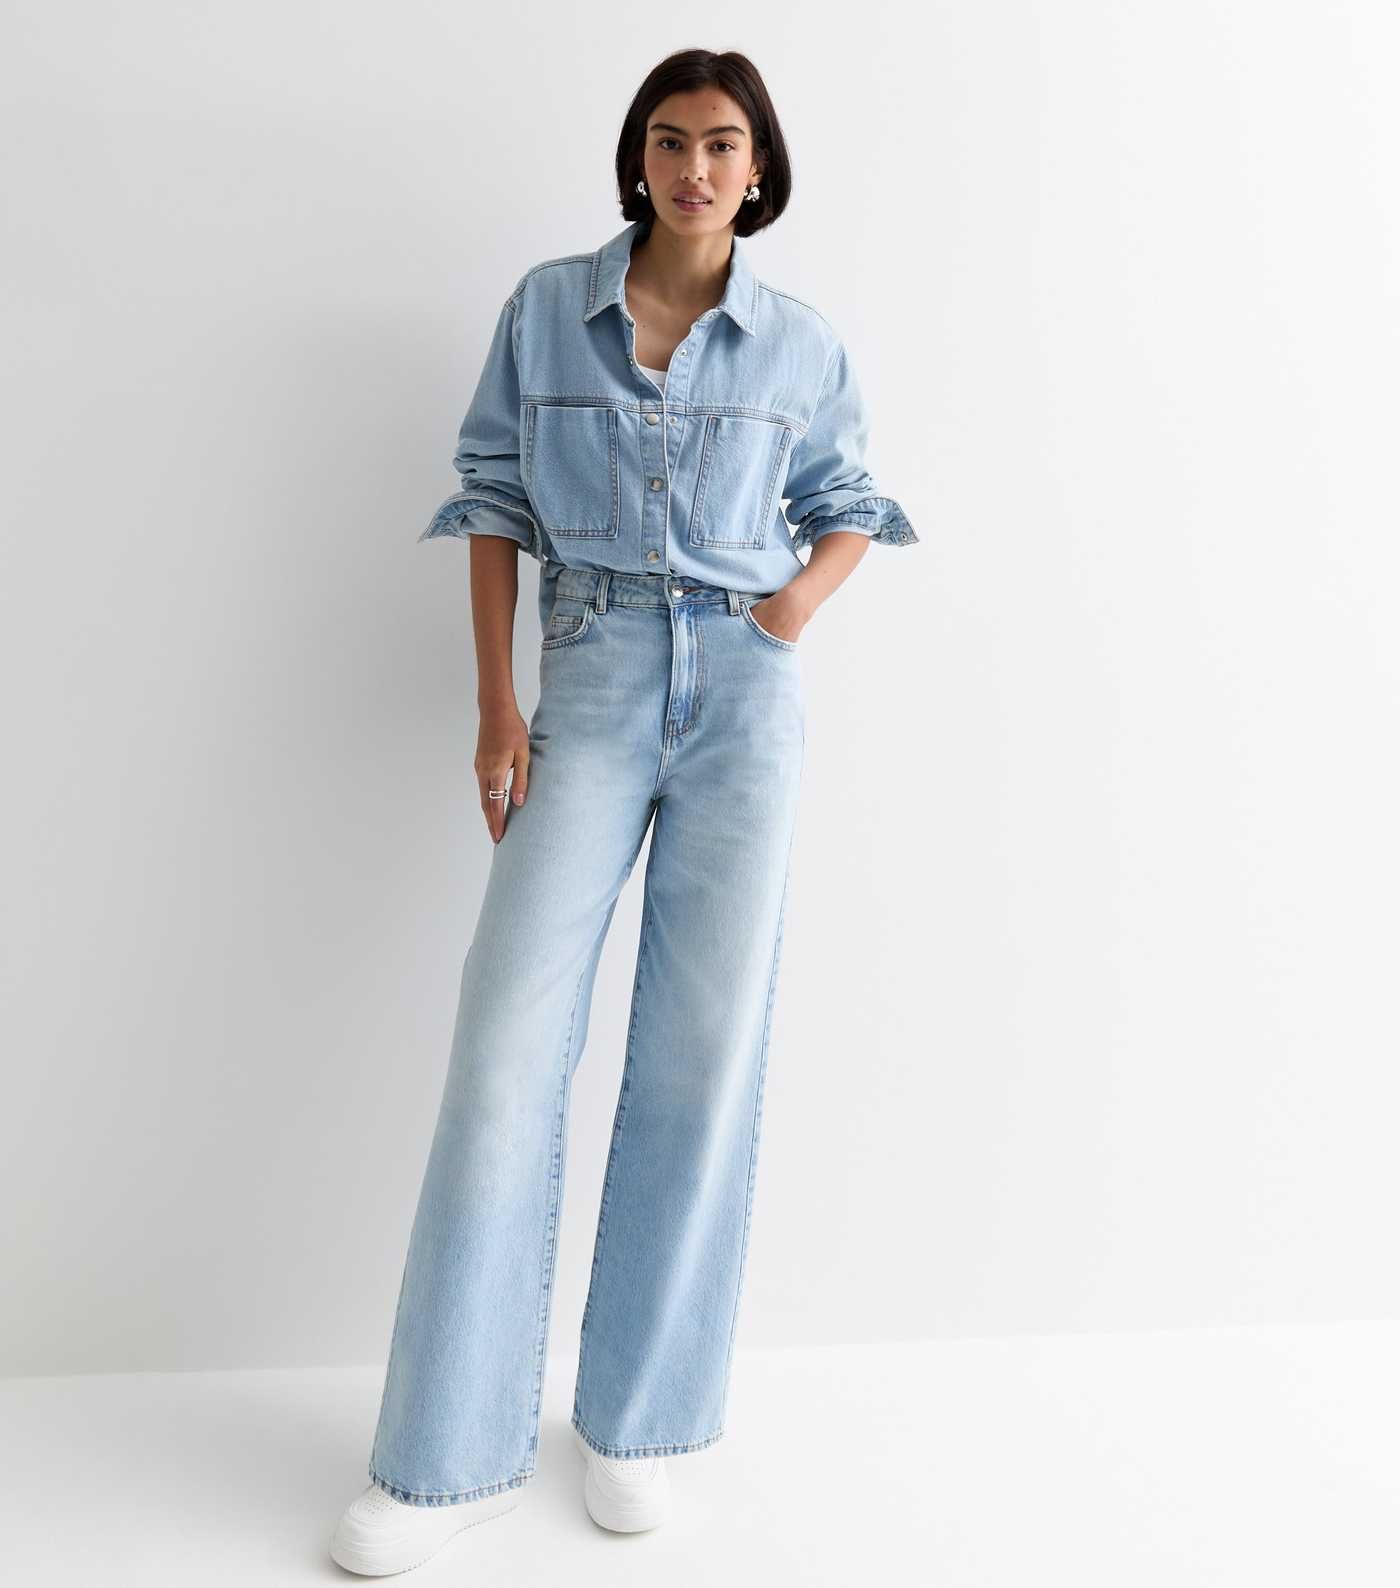 Pale Blue High Waist Adalae Wide Leg Jeans
						
						Add to Saved Items
						Remove from Save... | New Look (UK)